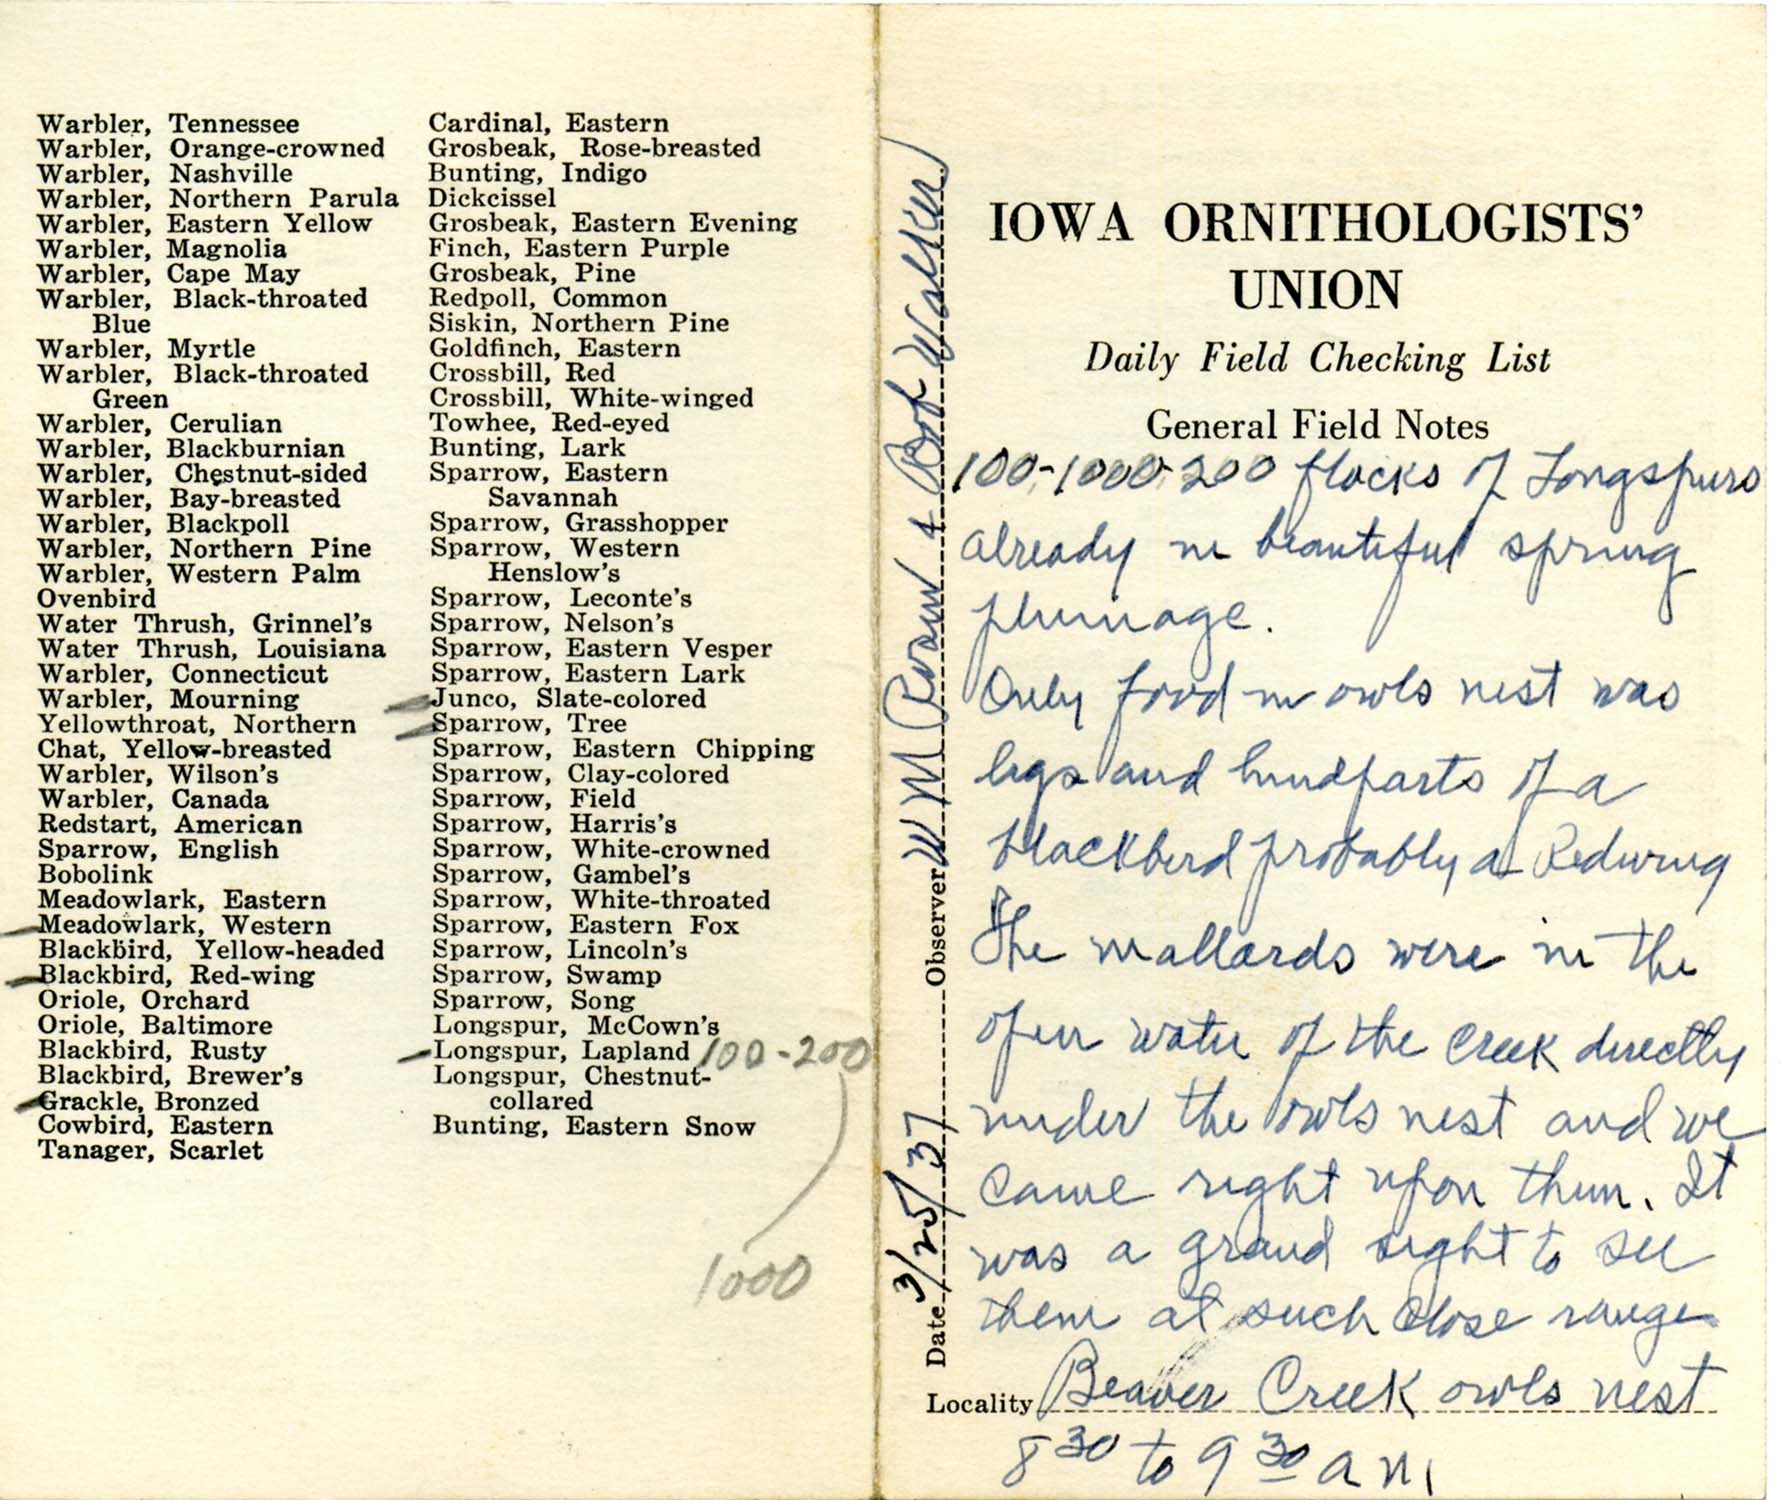 Daily field checking list by Walter Rosene, March 25, 1937